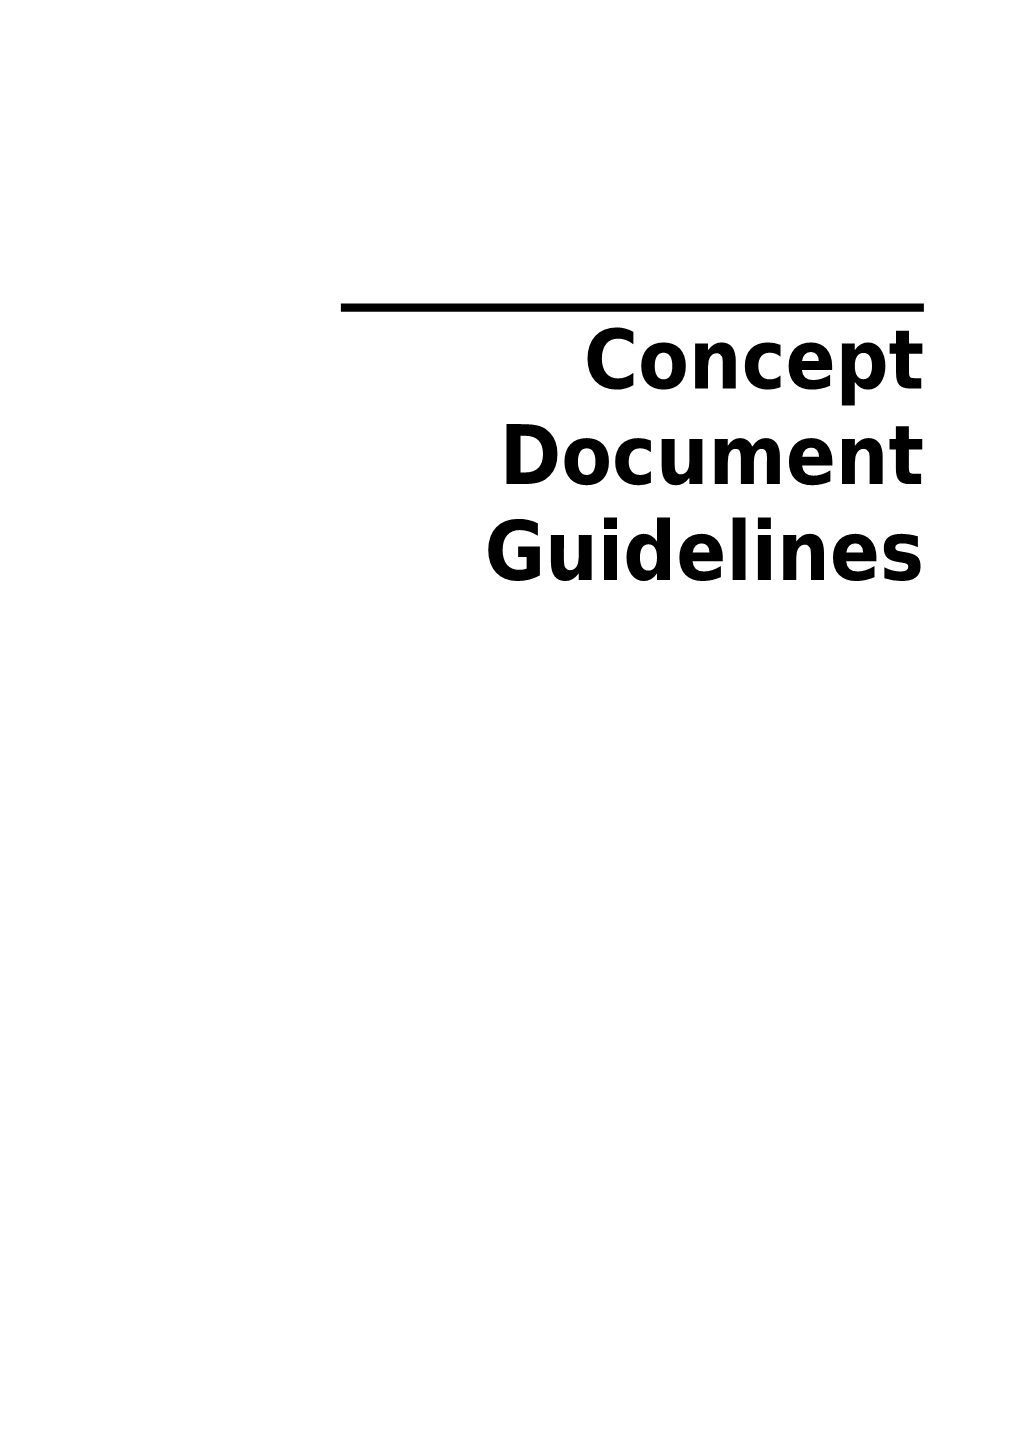 Concept Document Guidelines